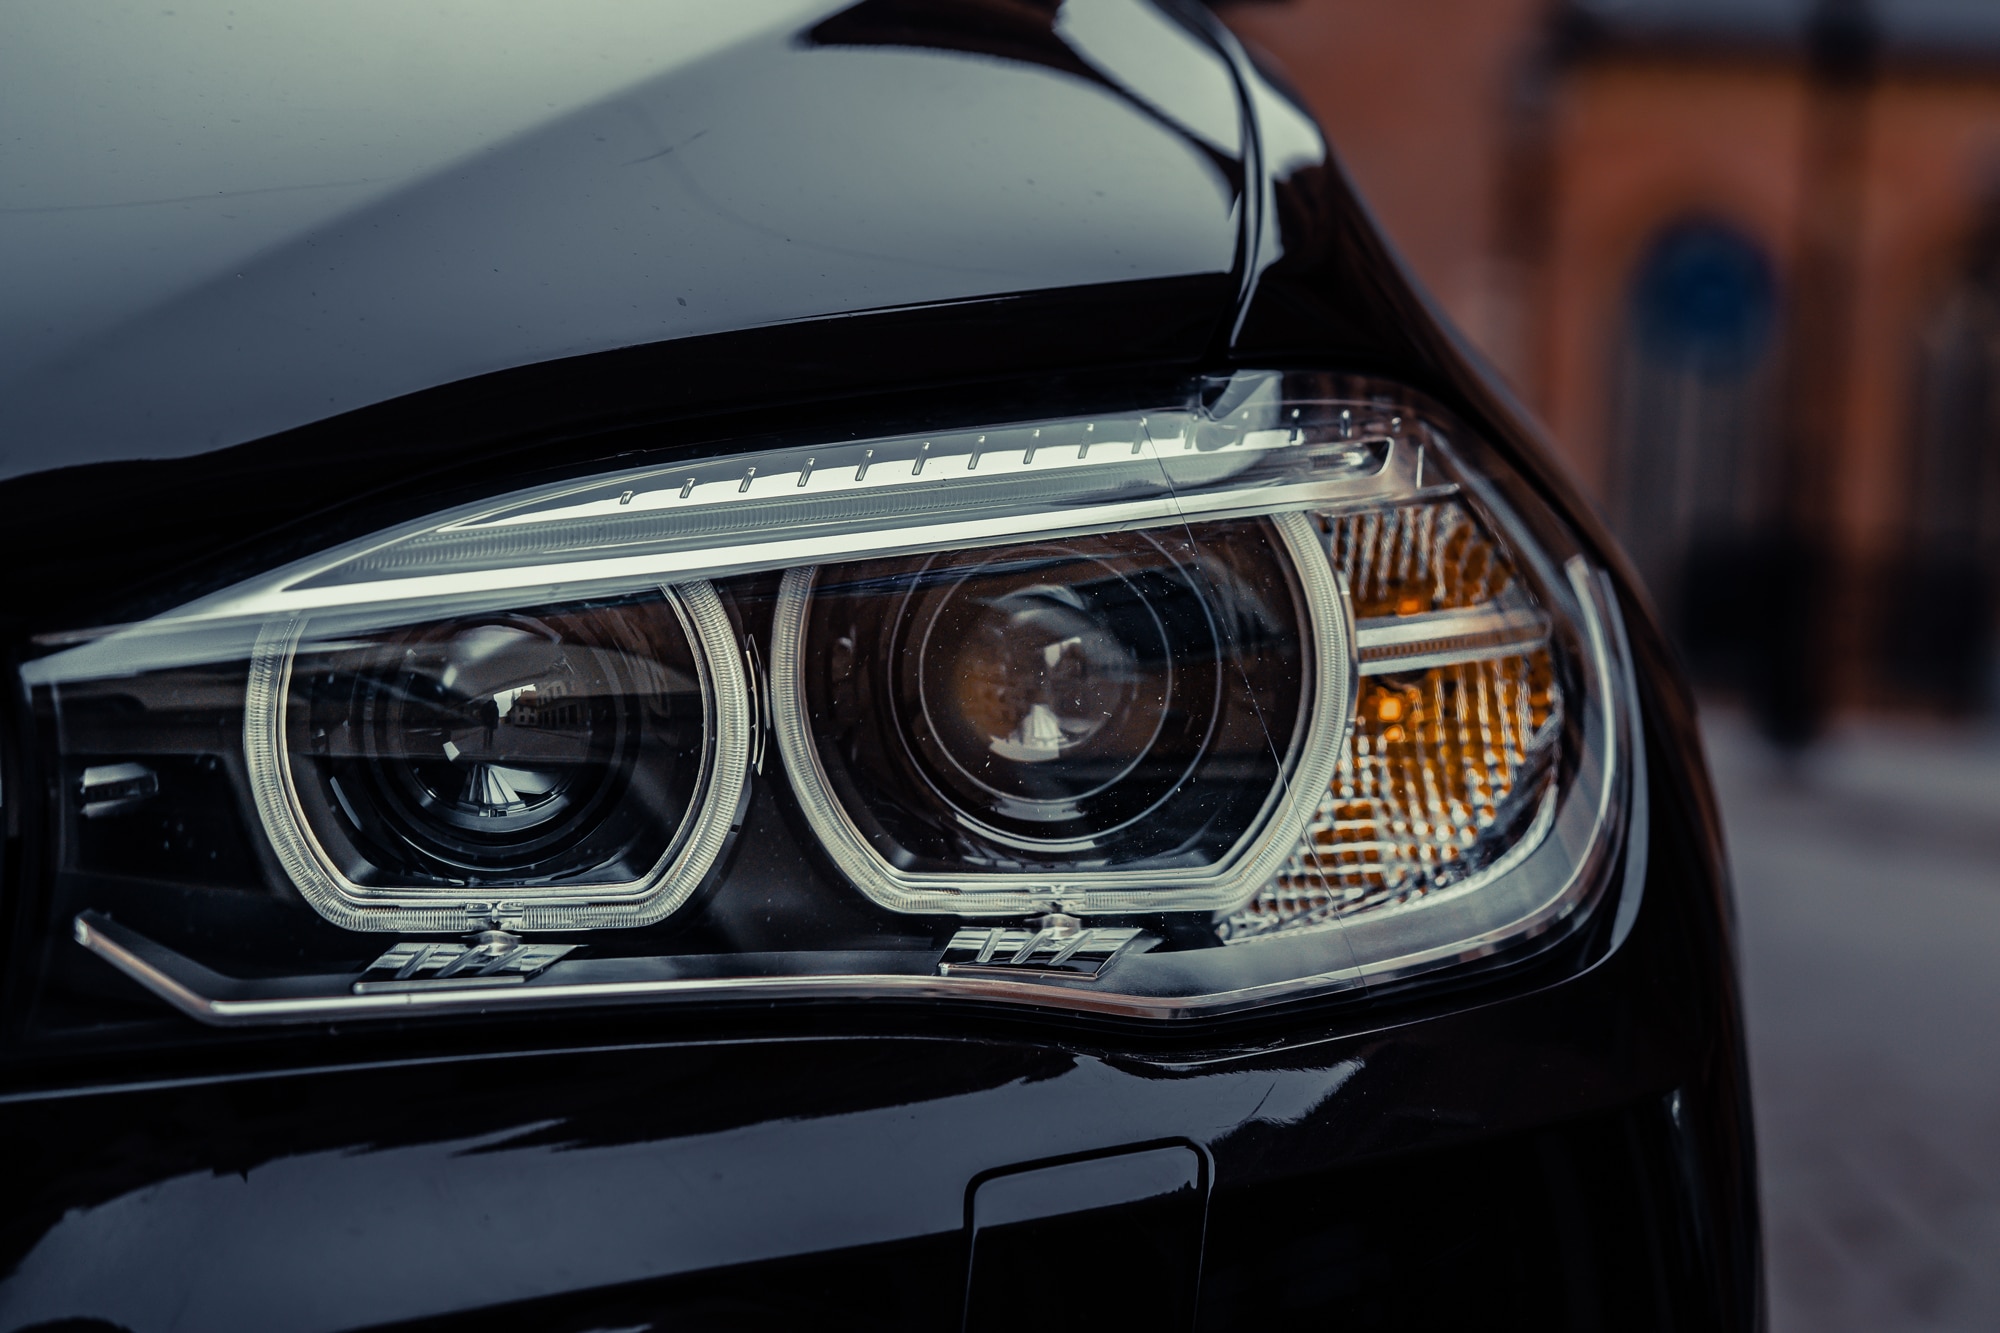 https://autoimage.capitalone.com/cms/Auto/assets/images/1498-hero-how-to-pick-the-best-replacement-headlights.jpg